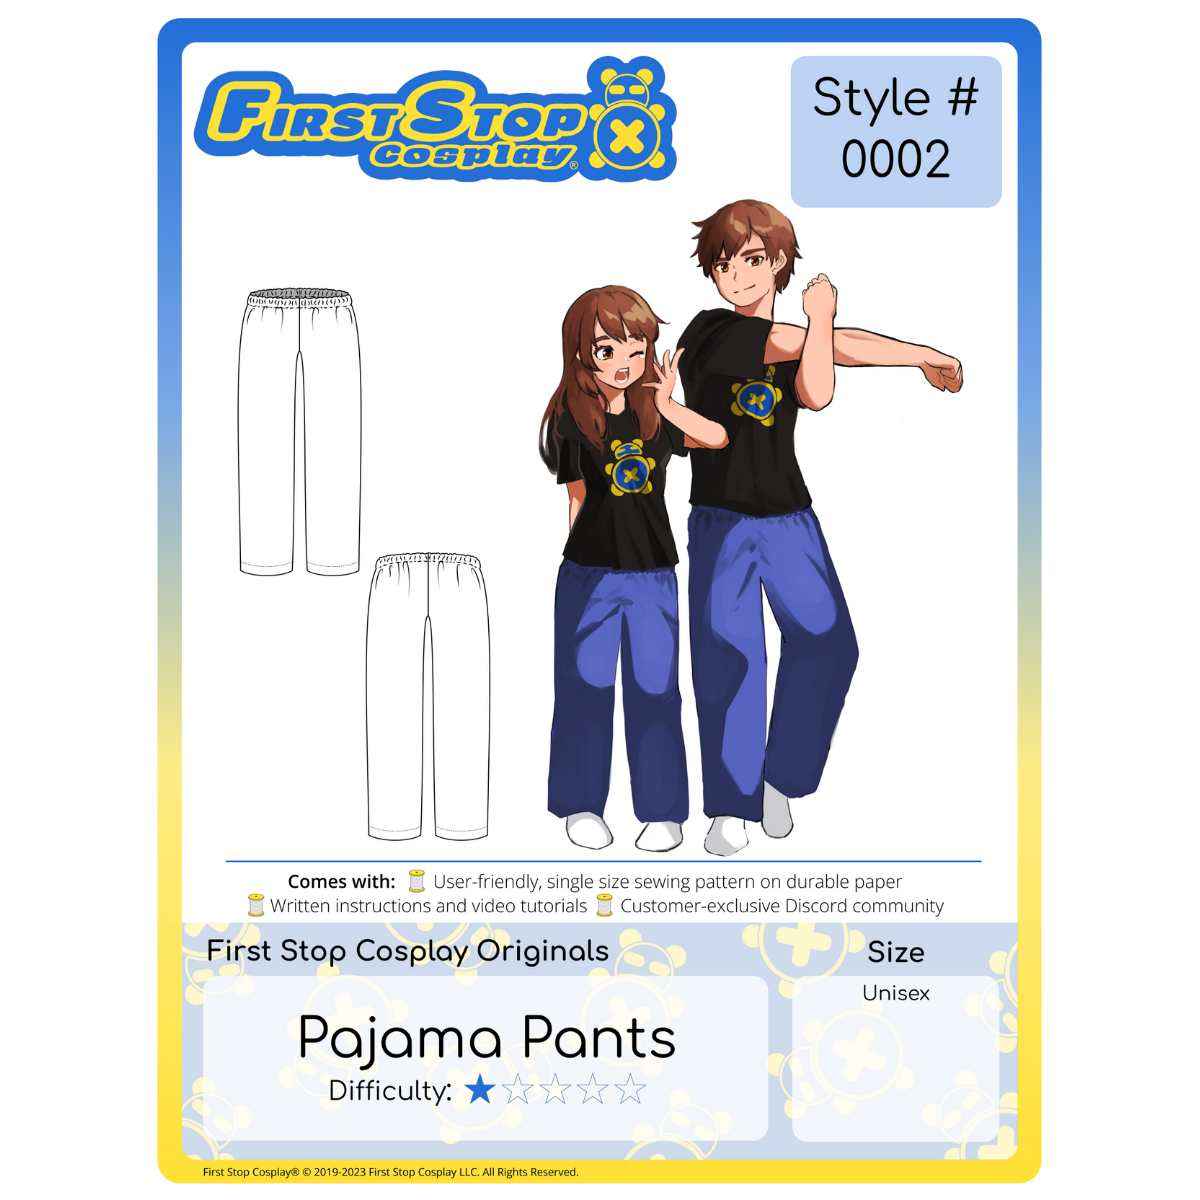 A graphic of the front packaging for Style #0002- Pajama Pants. The First Stop Cosplay logo is in the top left corner. Below the logo is line art of the completed pattern. To the right is an image of our female and male characters, Pan & Dah, wearing the completed Pajama Pants with a black Timmy graphic t-shirt. This pattern is 1 star in difficulty rating and follows our unisex size chart.